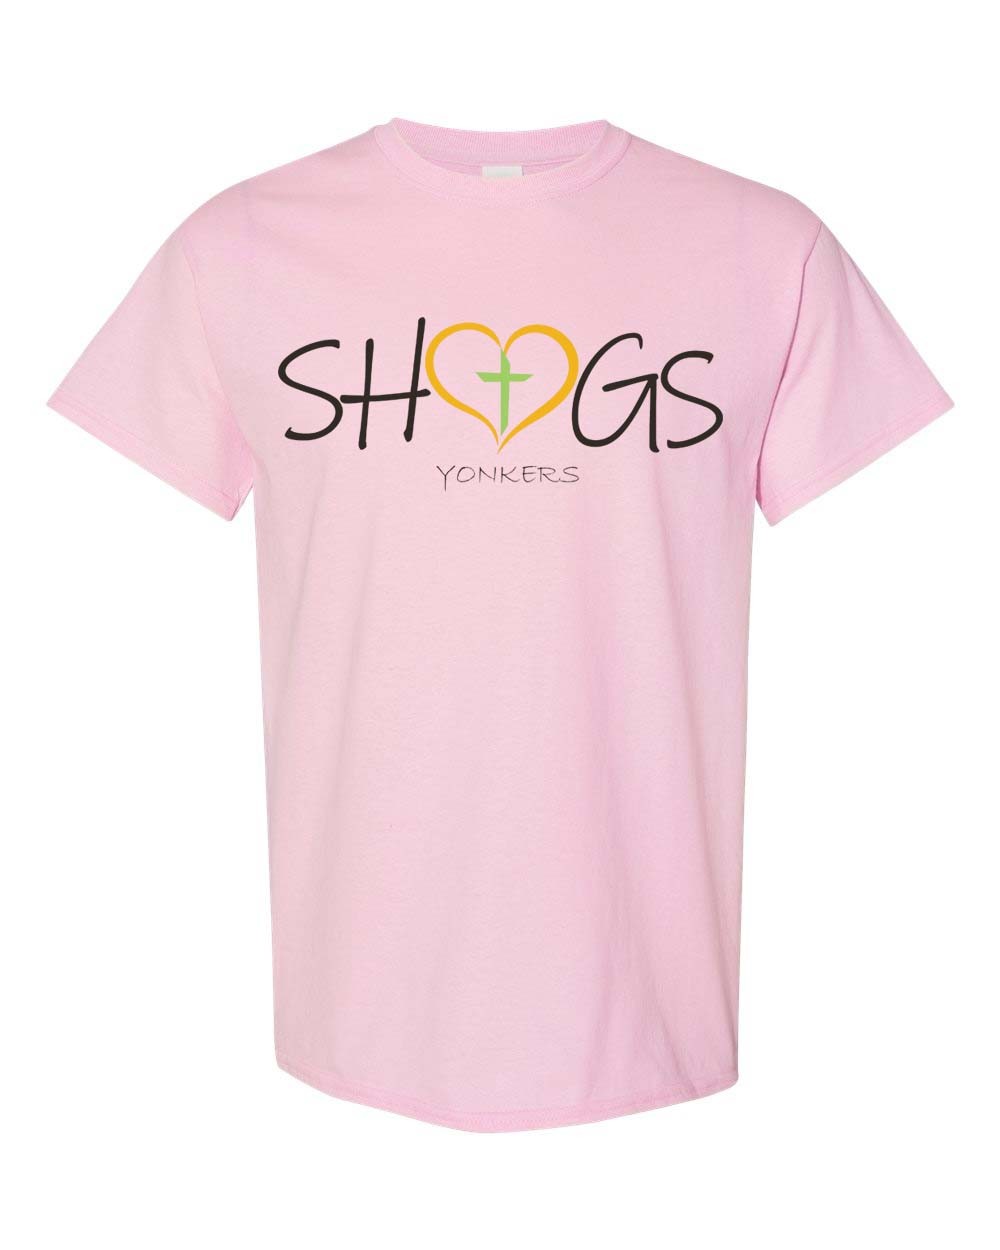 SHGS Spirit S/S T-Shirt w/ Heart Logo - Please Allow 2-3 Weeks for Delivery